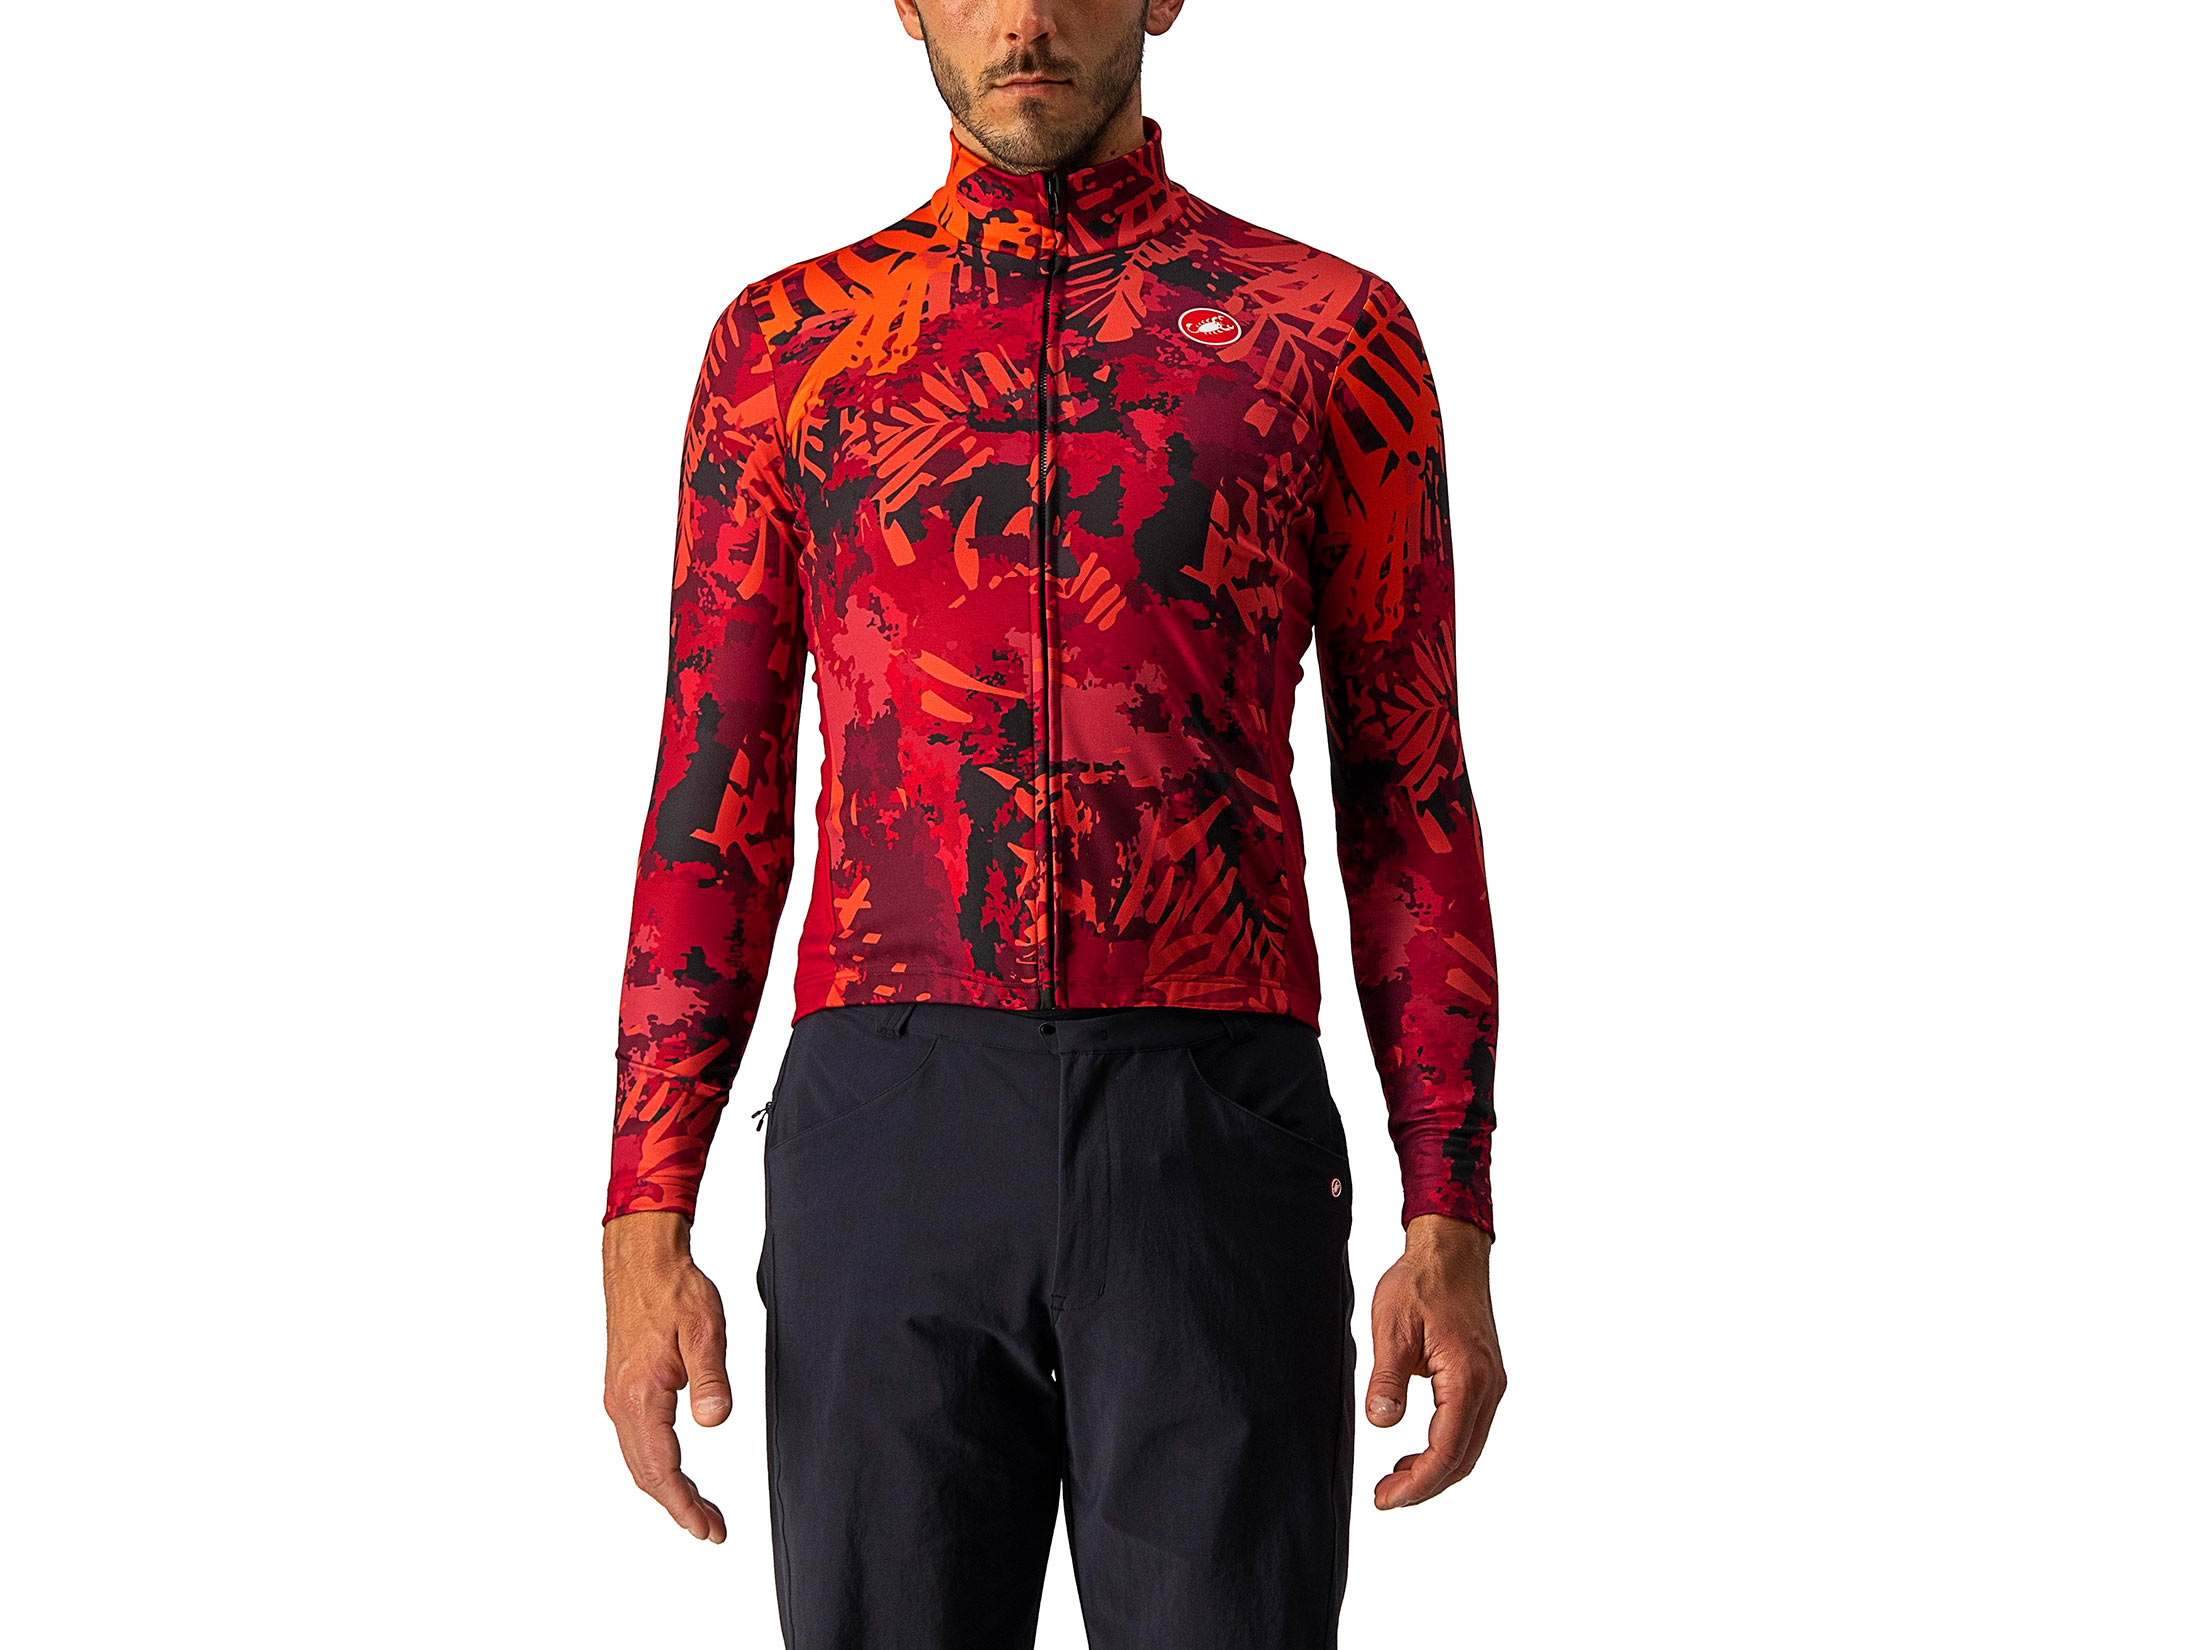 Castelli Unlimited Thermal Jersey - Bordeaux / Pro Red (M)